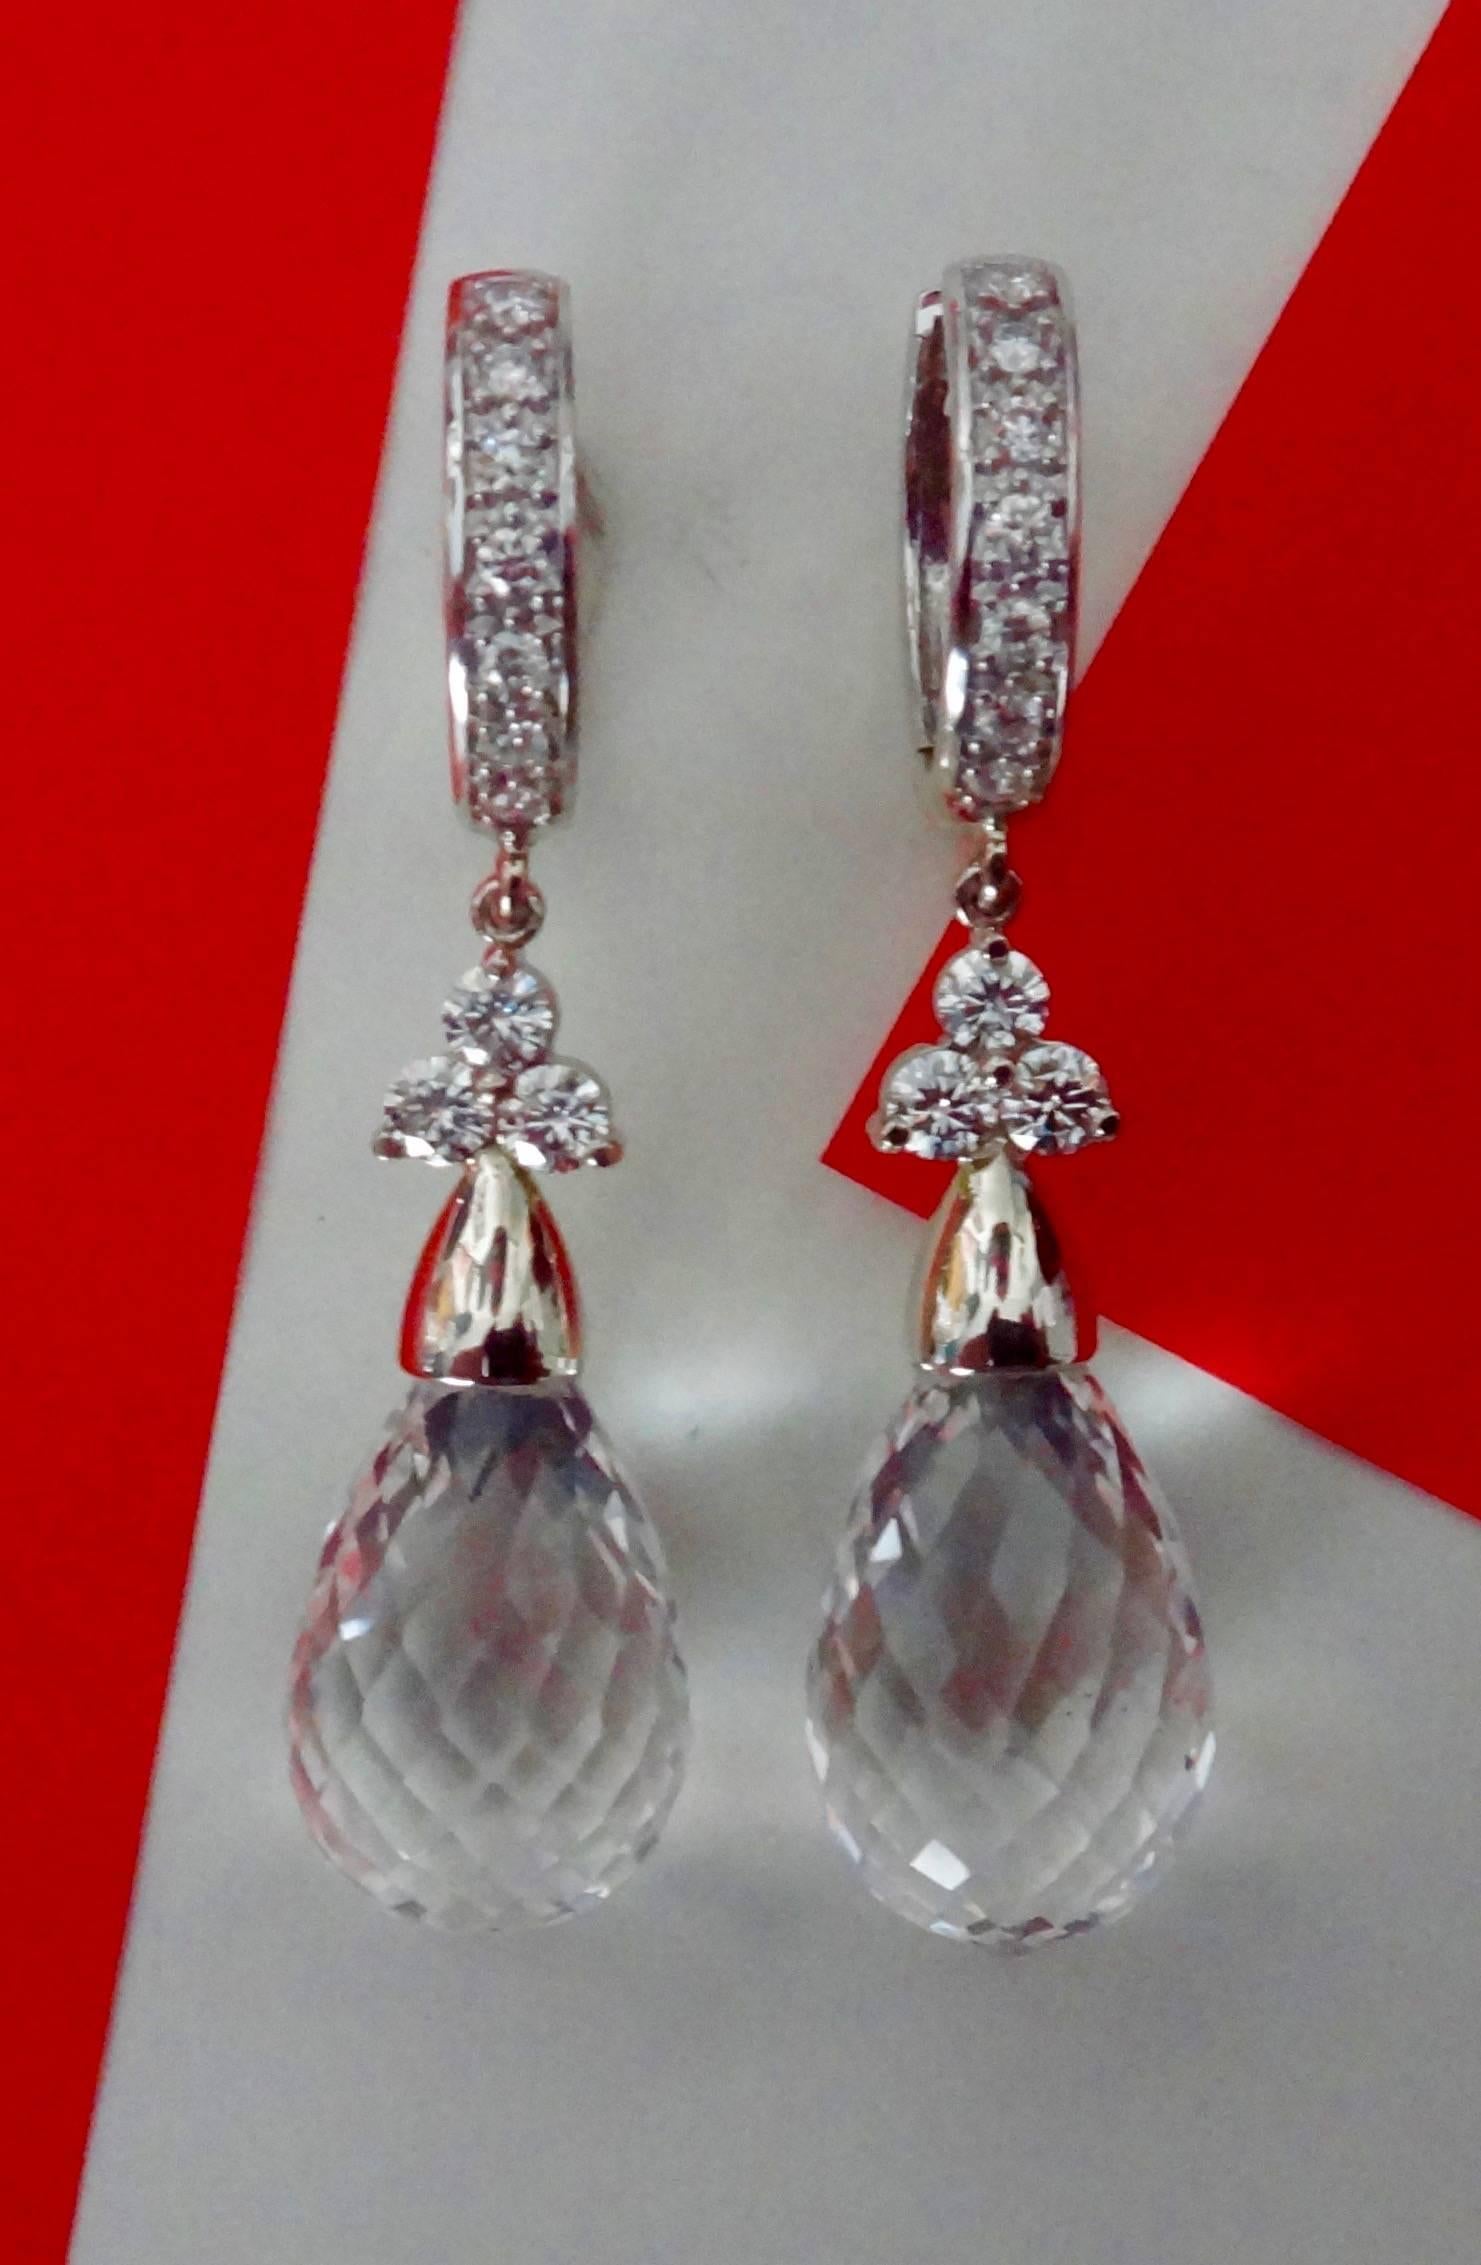 Faceted rock crystal briolette are decorated with diamonds and suspended from diamond "Huggie" style hoops in these dangle earrings.  All set in 14 karat white gold.